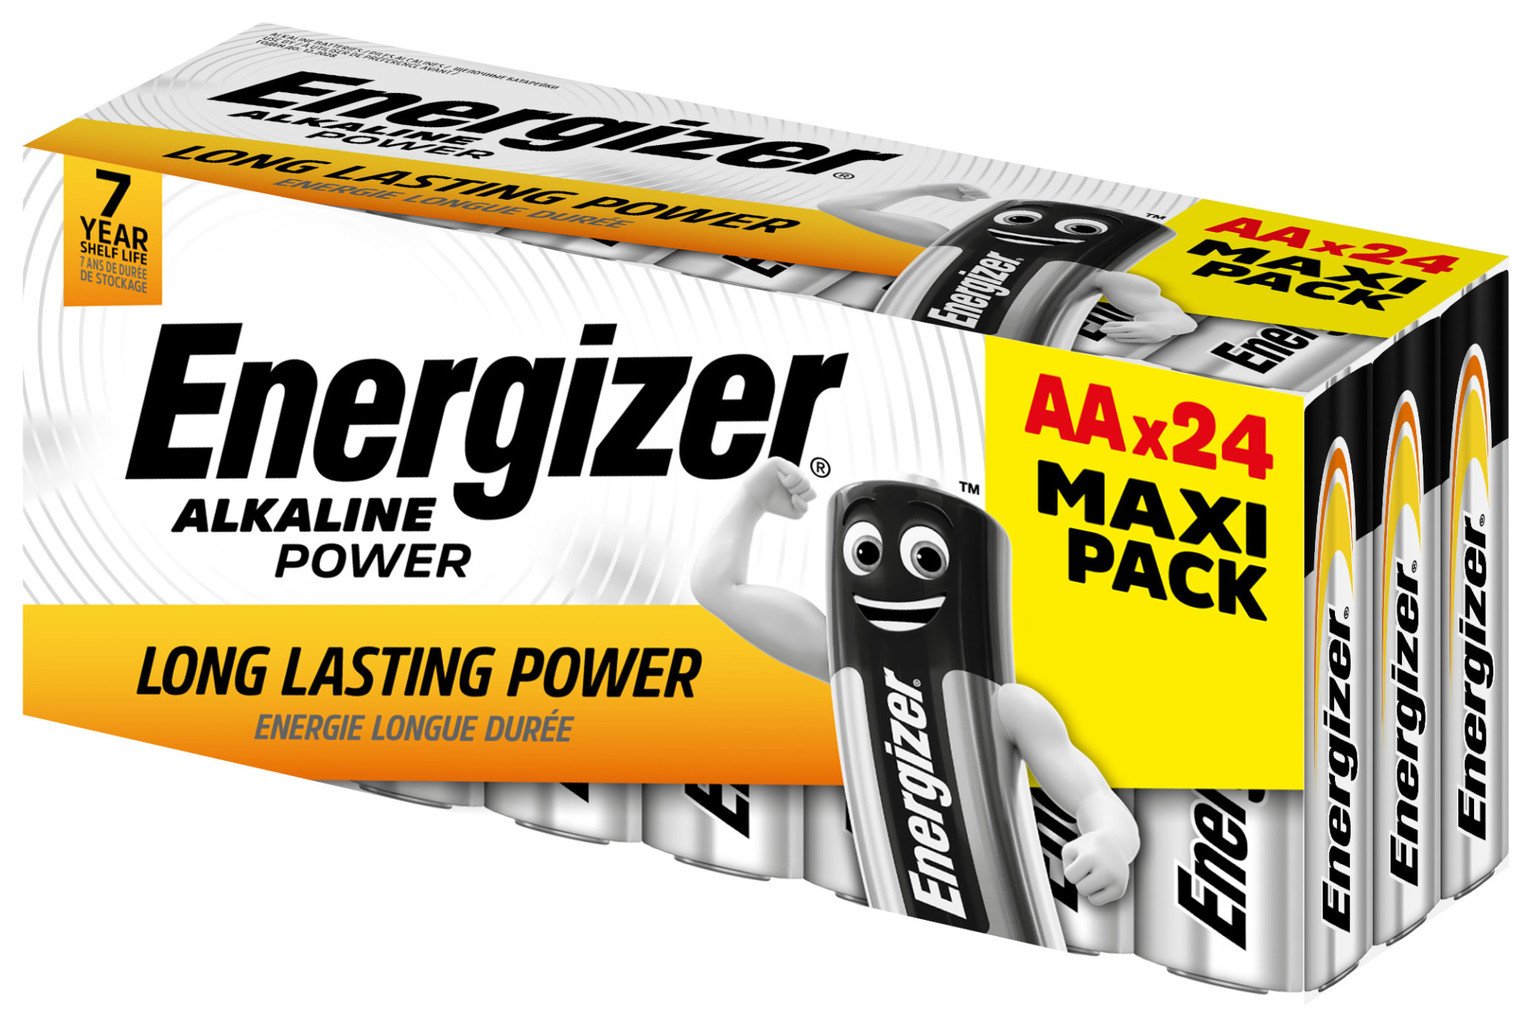 Energizer Family Pack AA Batteries - 24 Pack Review